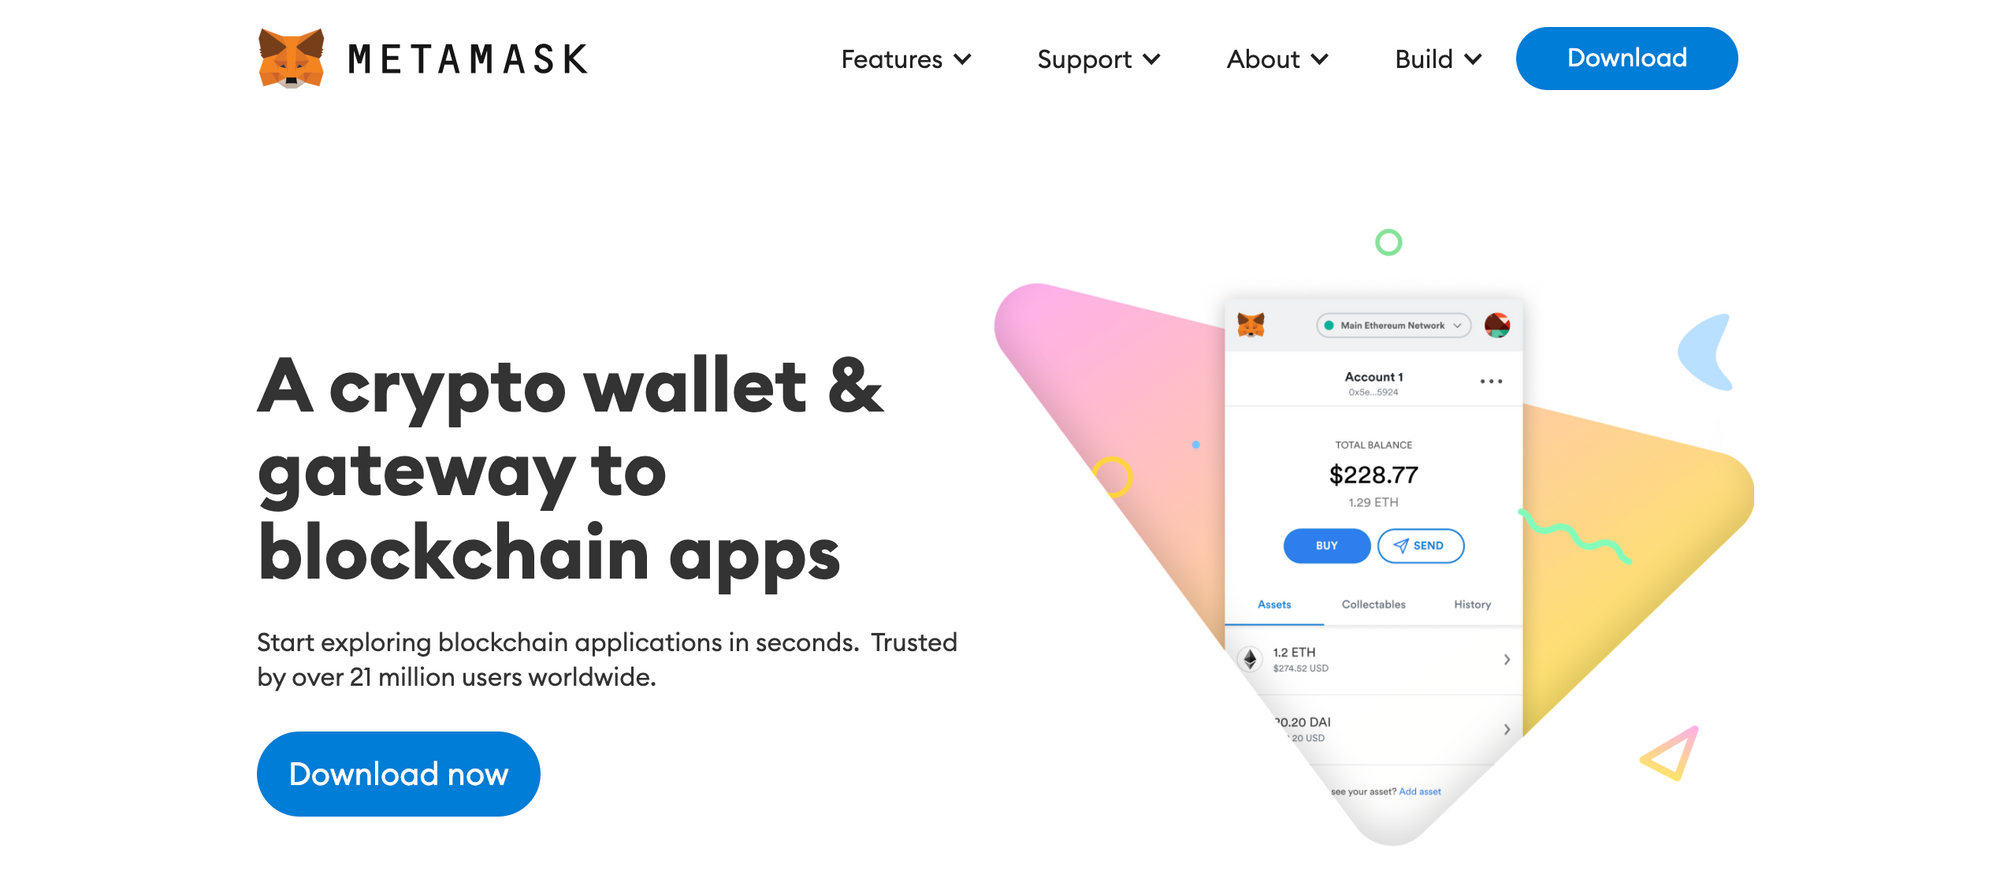 MetaMask Wallet Review - Everything You Need to Know